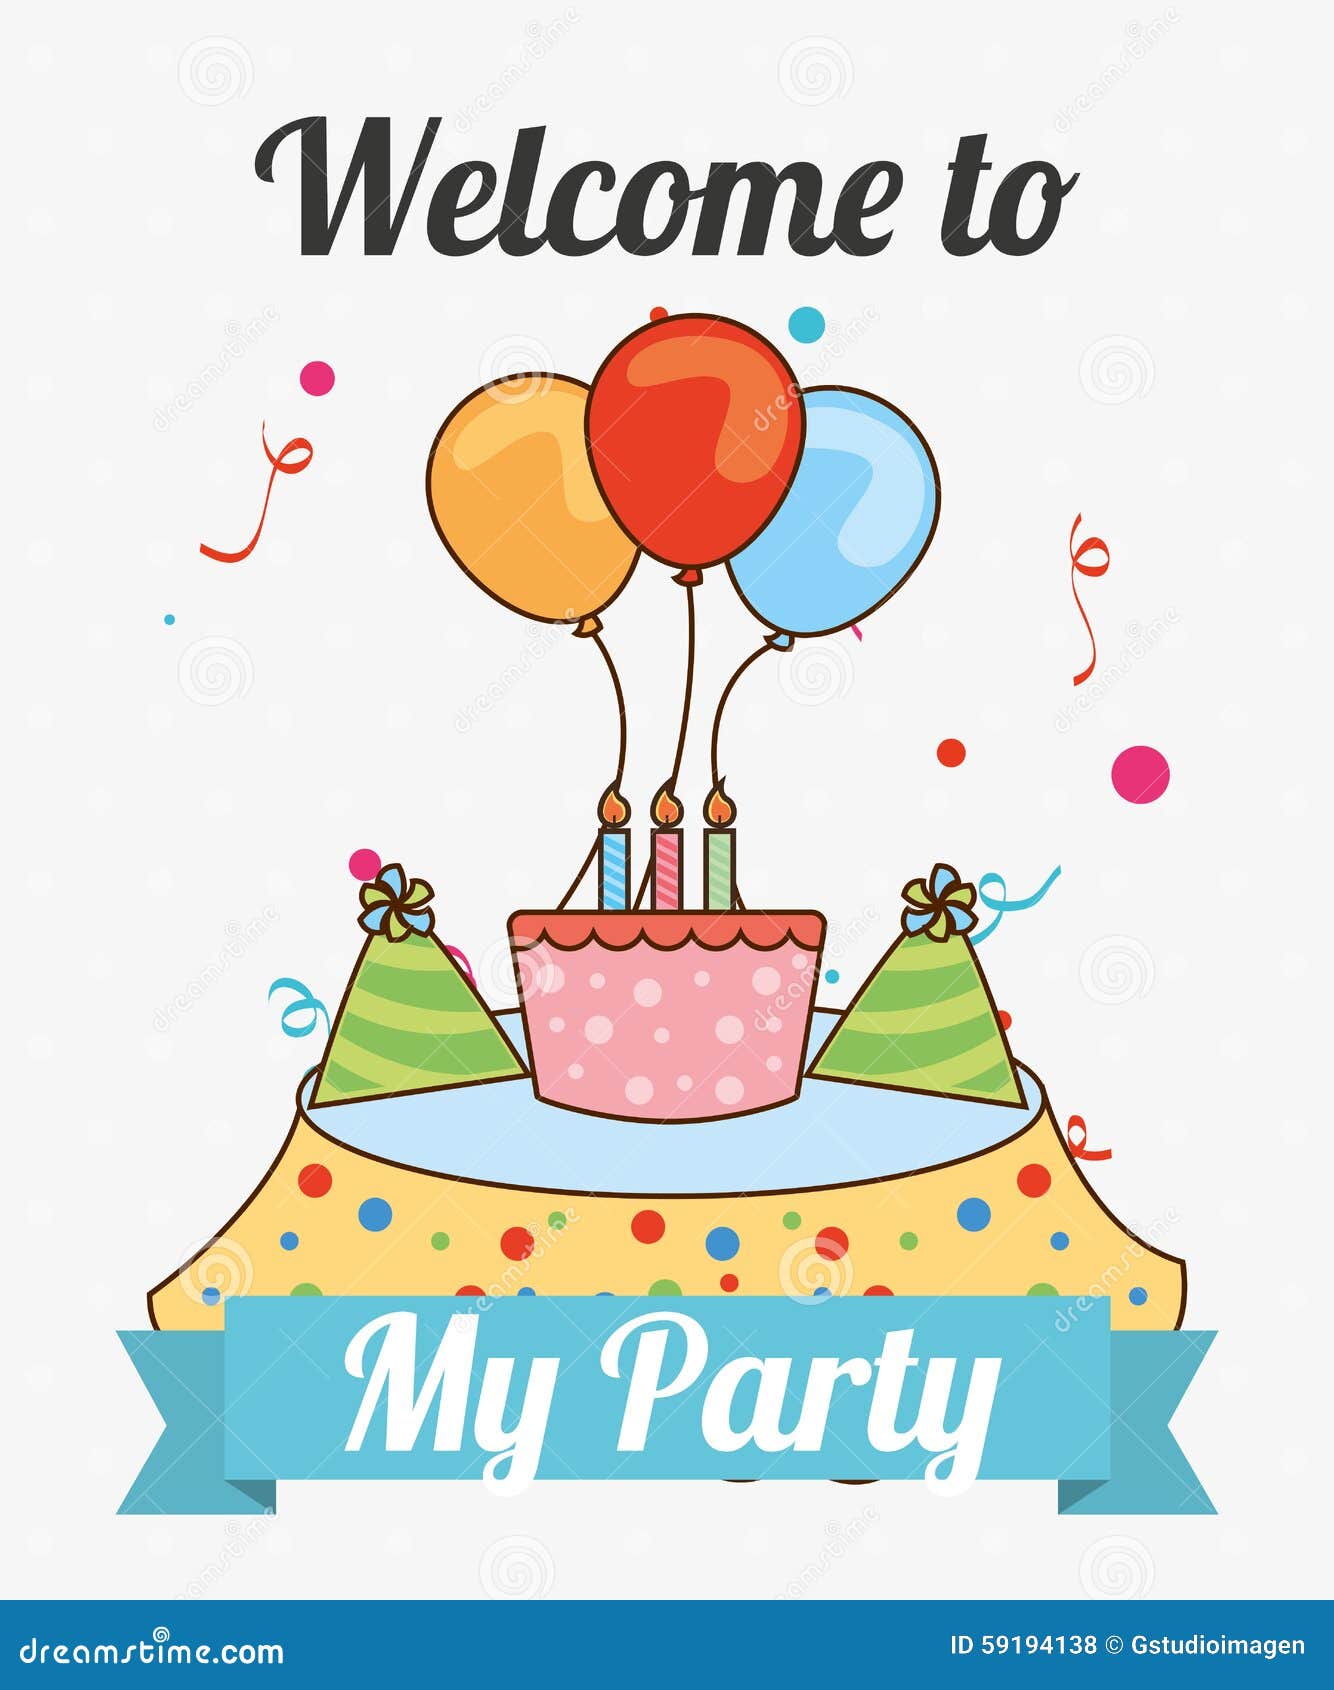 Welcome To My Birthday Stock Illustrations – 56 Welcome To My ...